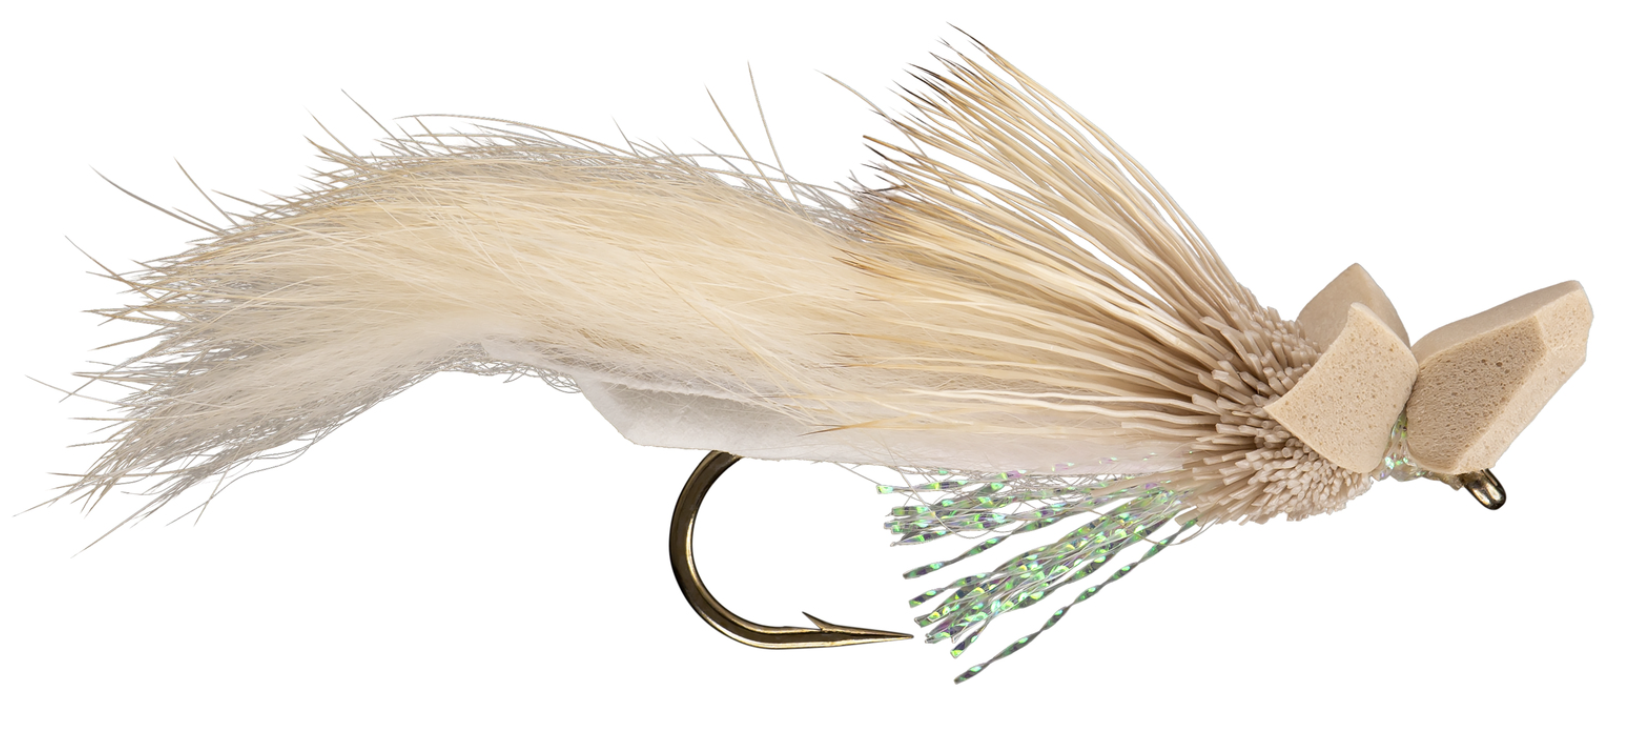 Great fly to add to the fly box for Alaska salmon fishing available online for sale